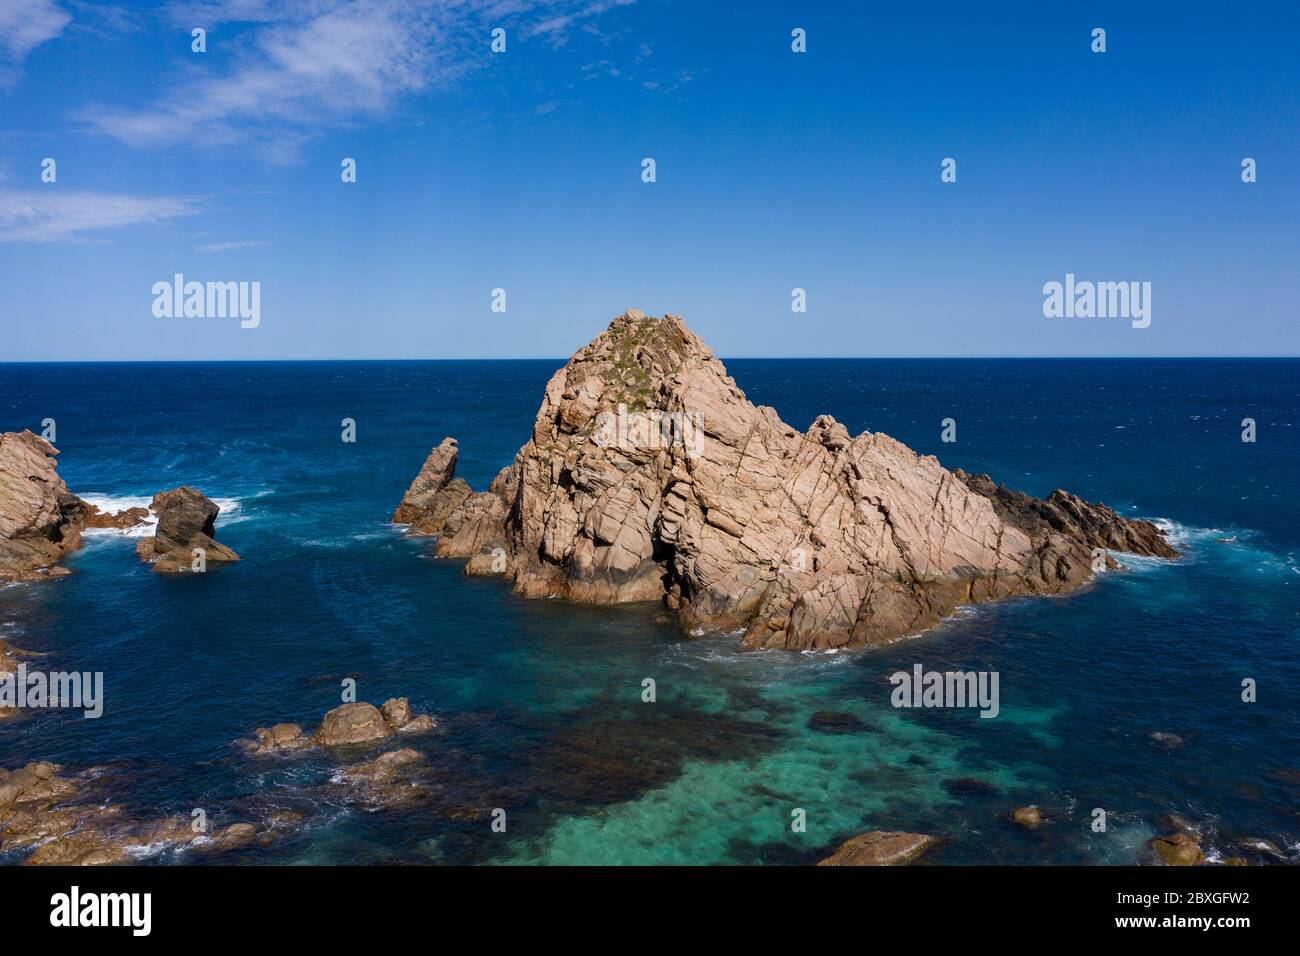 Sugarloaf Rock is a large, natural granite island in the Indian Ocean just off the coast approximately 2 kilometres south of Cape Naturaliste near Bus Stock Photo